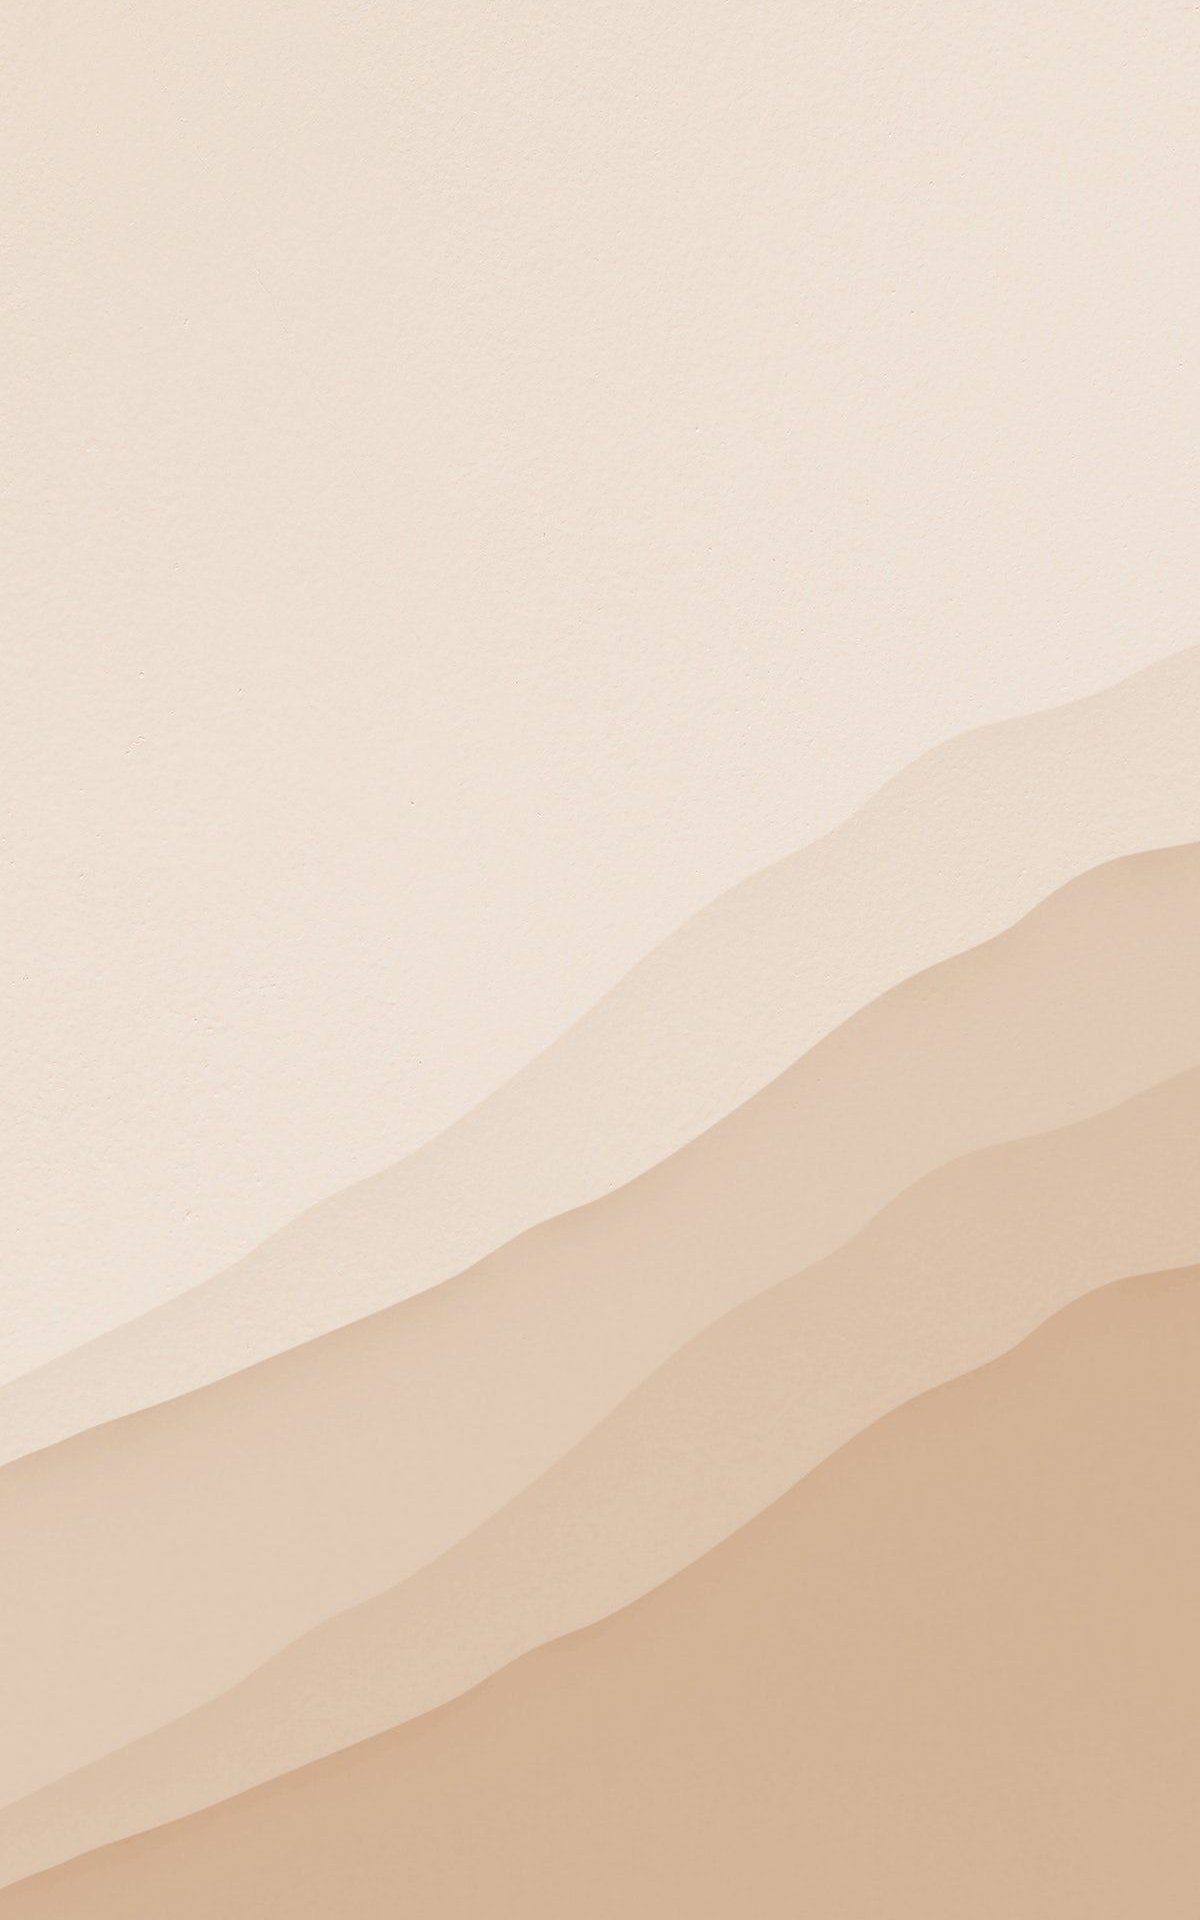 Free download Download illustration of Abstract beige wallpaper background [1200x2134] for your Desktop, Mobile & Tablet. Explore Beige Background. Beige Wallpaper, Beige Striped Wallpaper, Beige Geometric Wallpaper